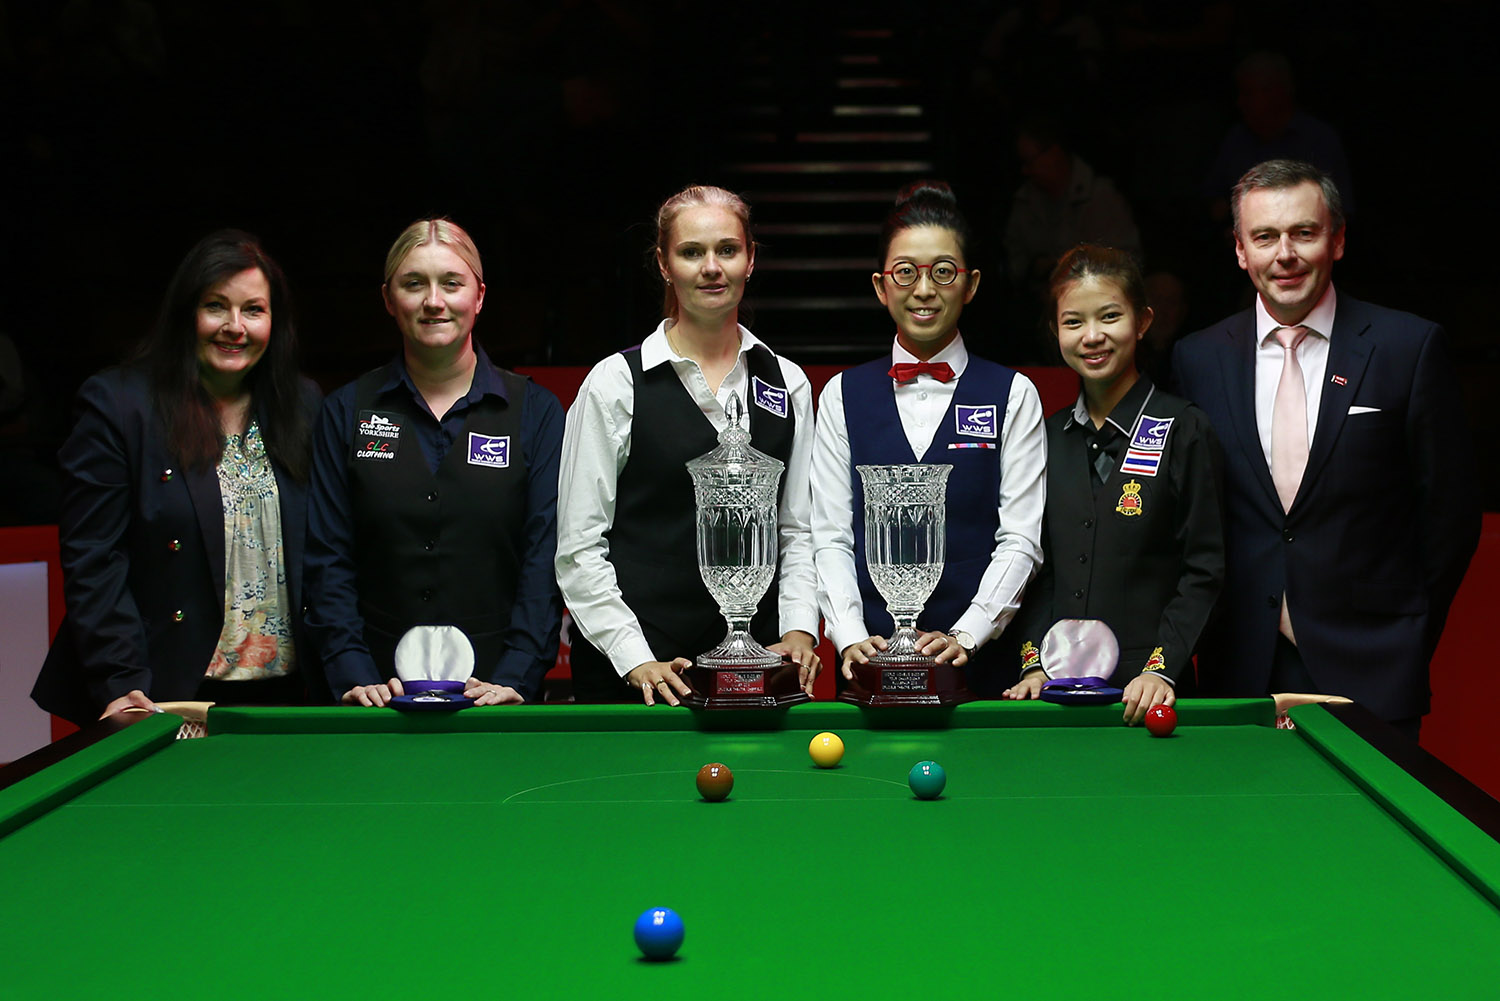 Evans is Queen of the Crucible - WPBSA